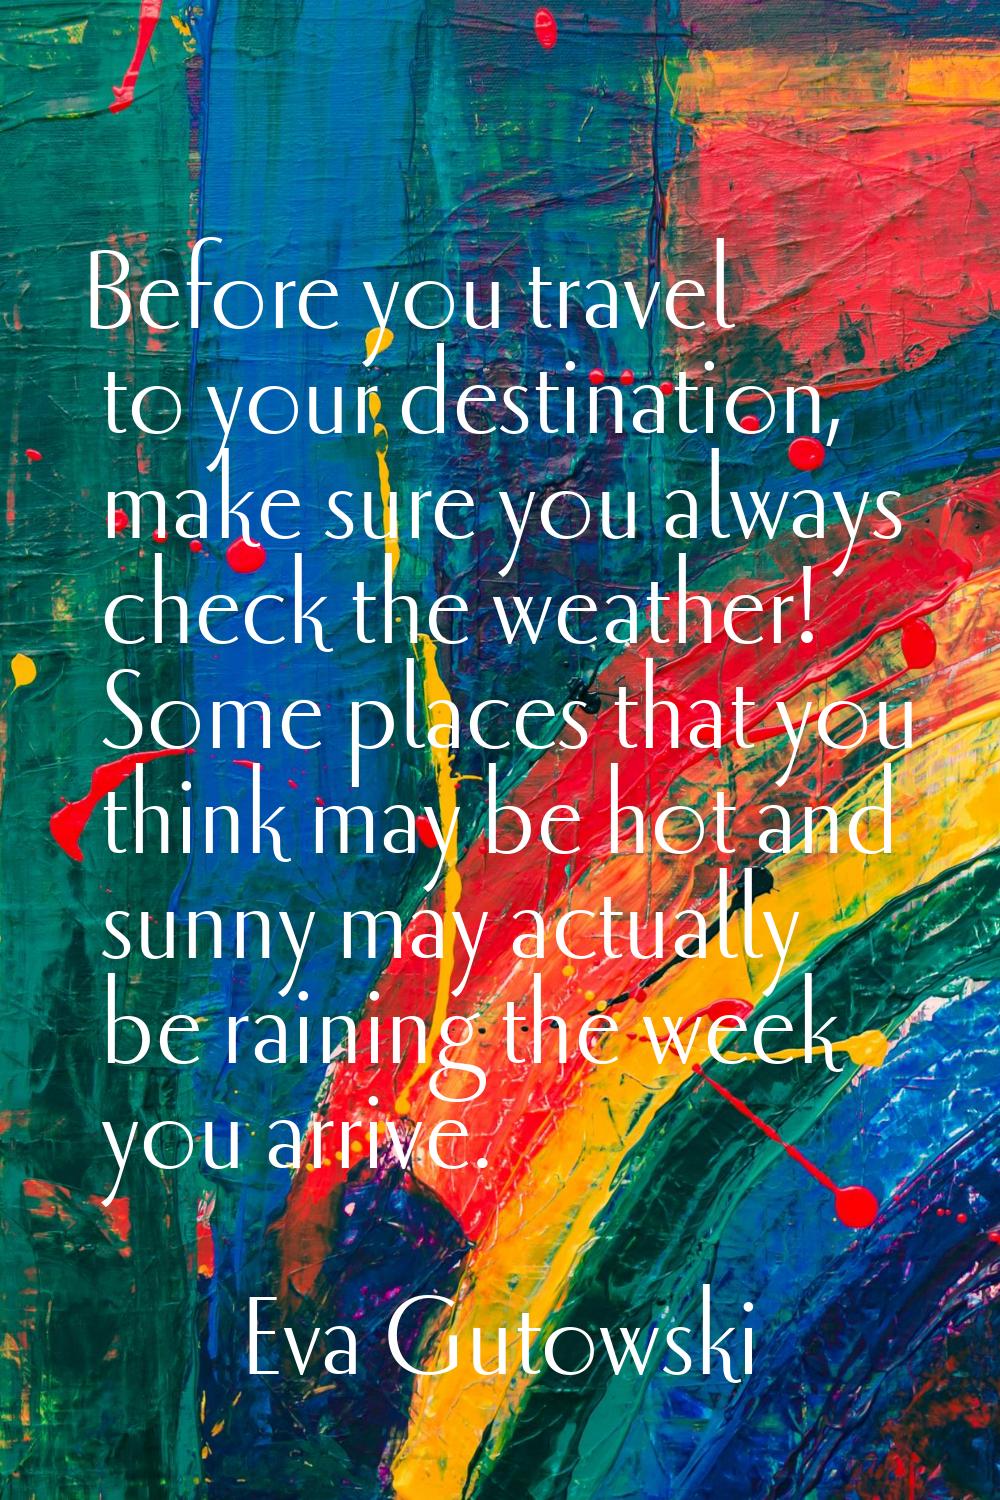 Before you travel to your destination, make sure you always check the weather! Some places that you